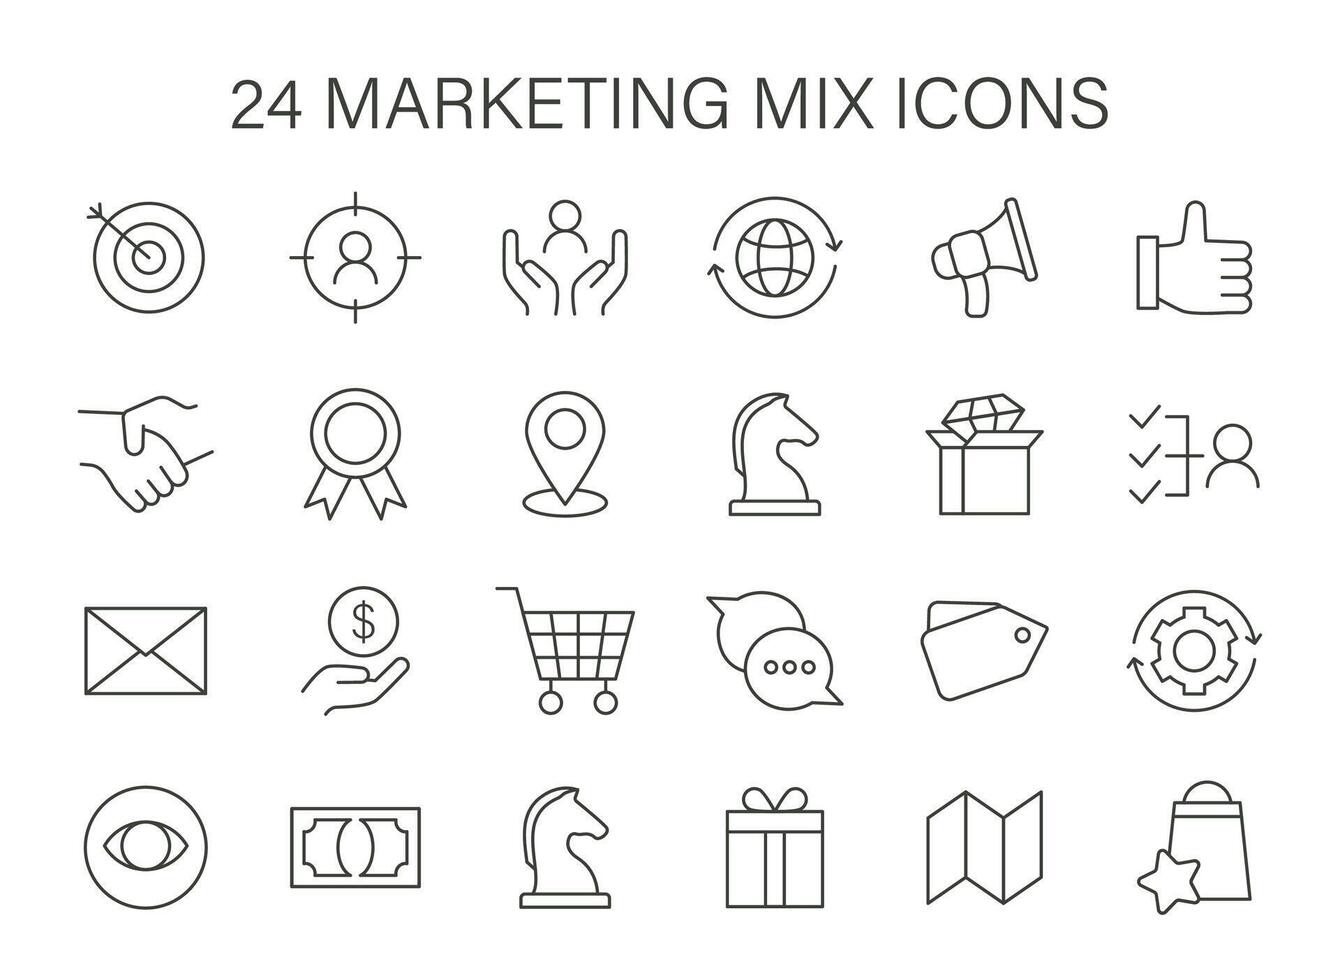 Marketing Mix icon set. Symbols represent strategic components like targeting, global reach, and customer service. vector